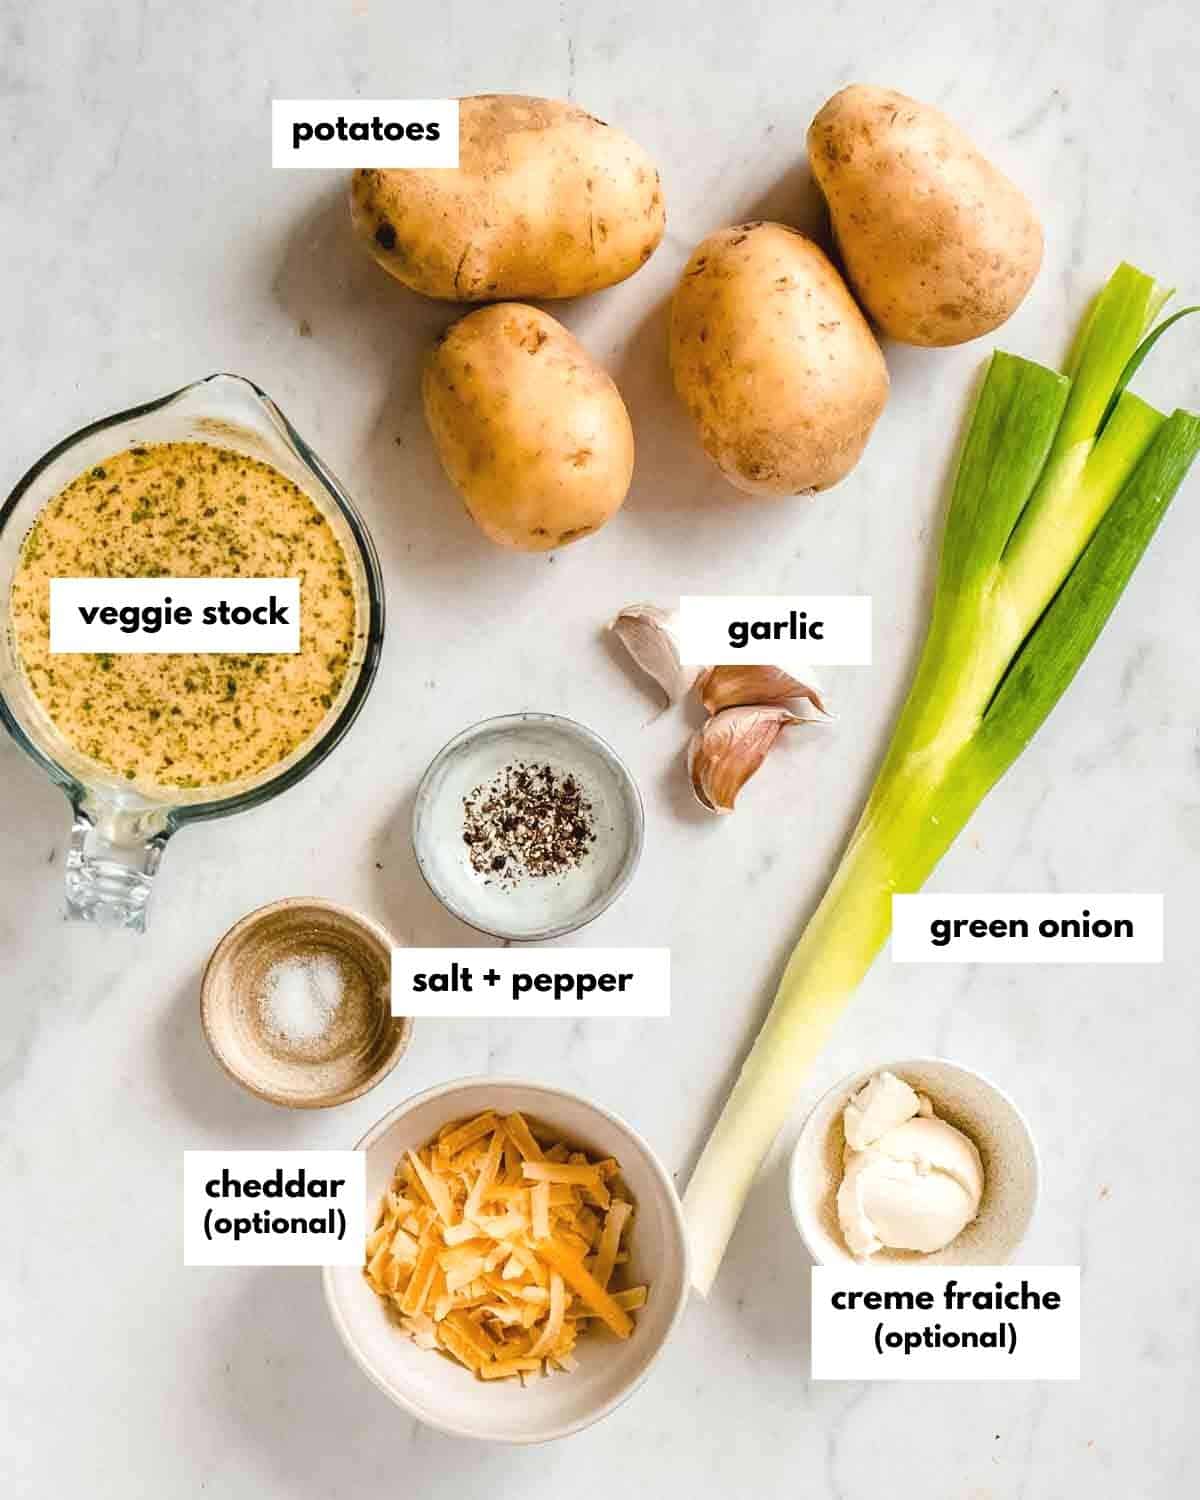 all ingredients needed to make vegetarian potato soup.